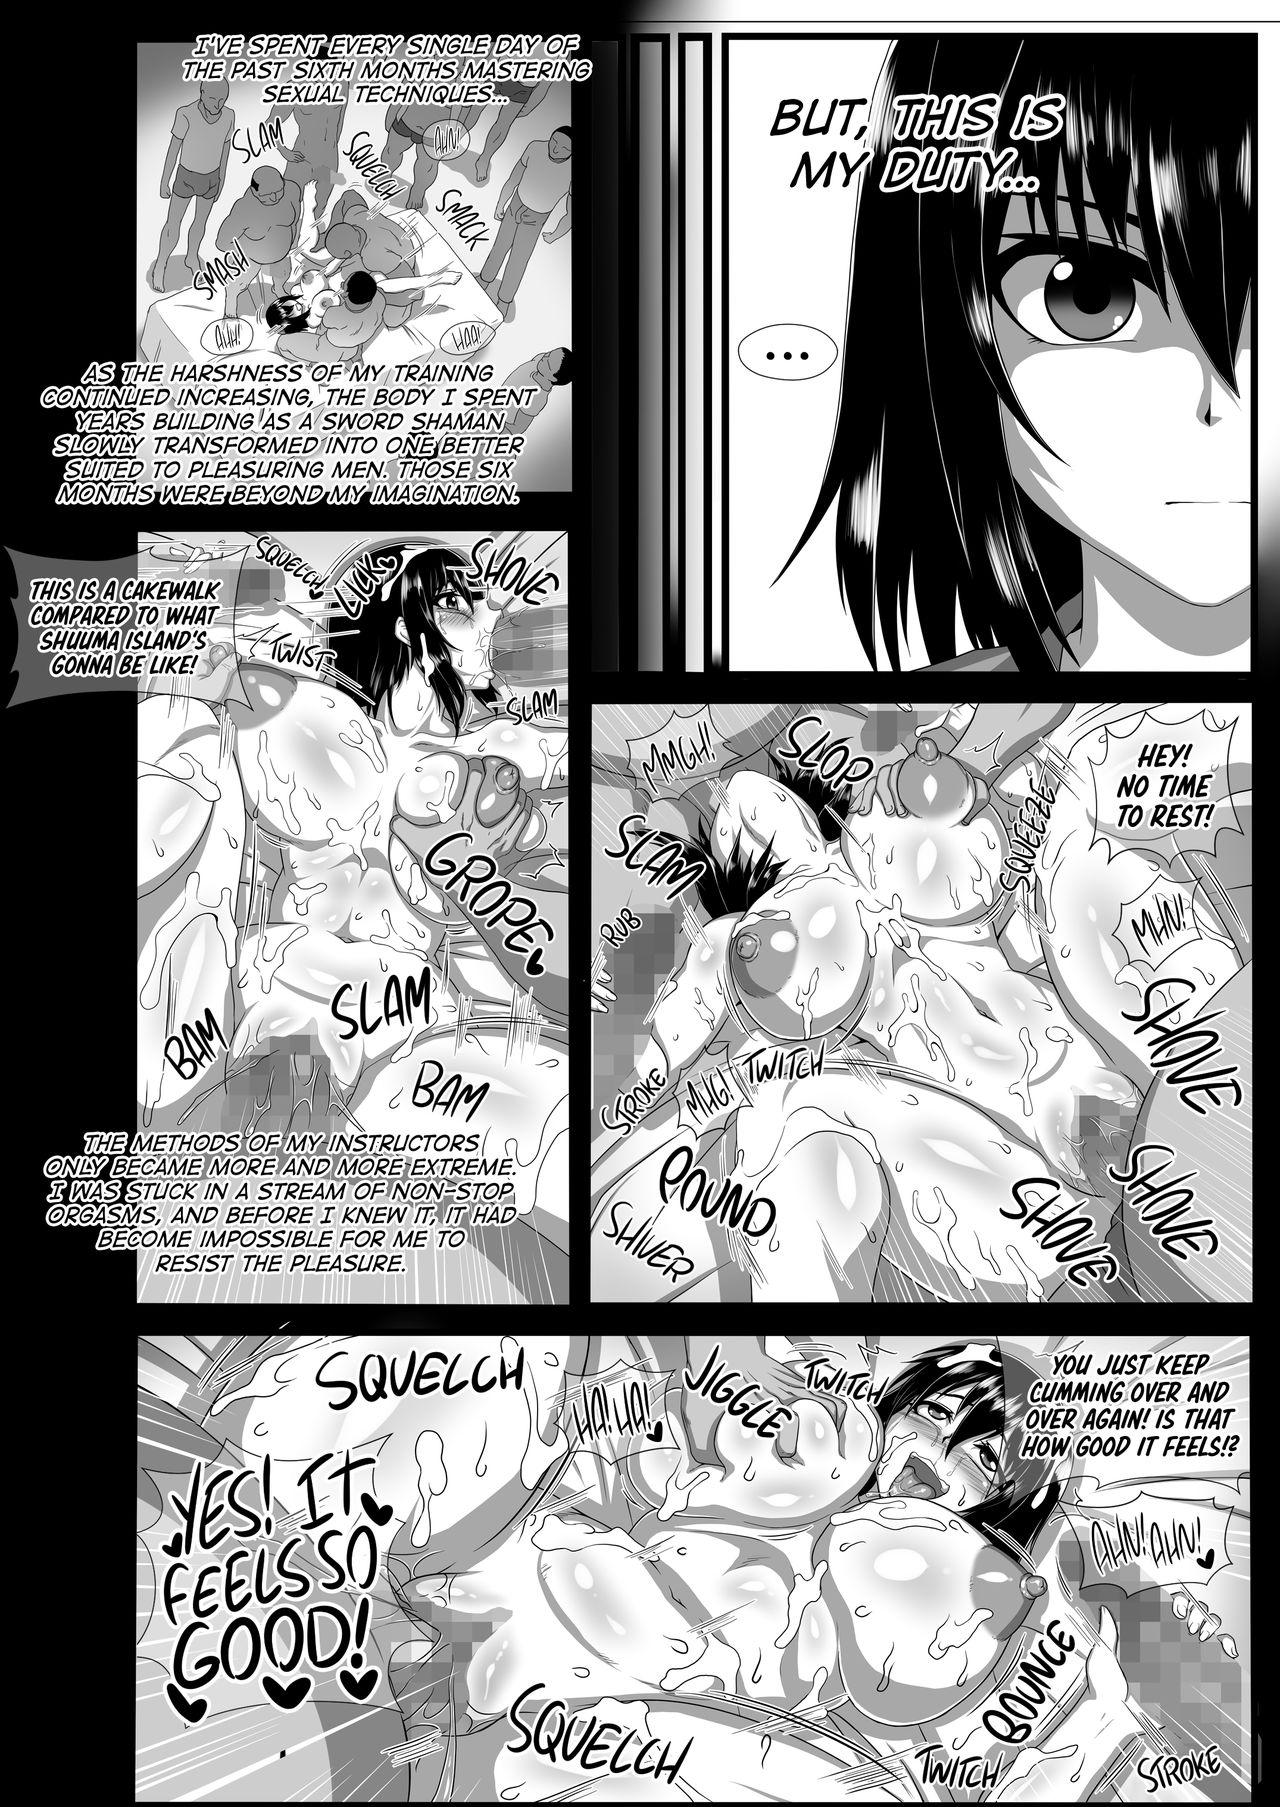 Negao Slave the Blood - Strike the blood Com - Page 7